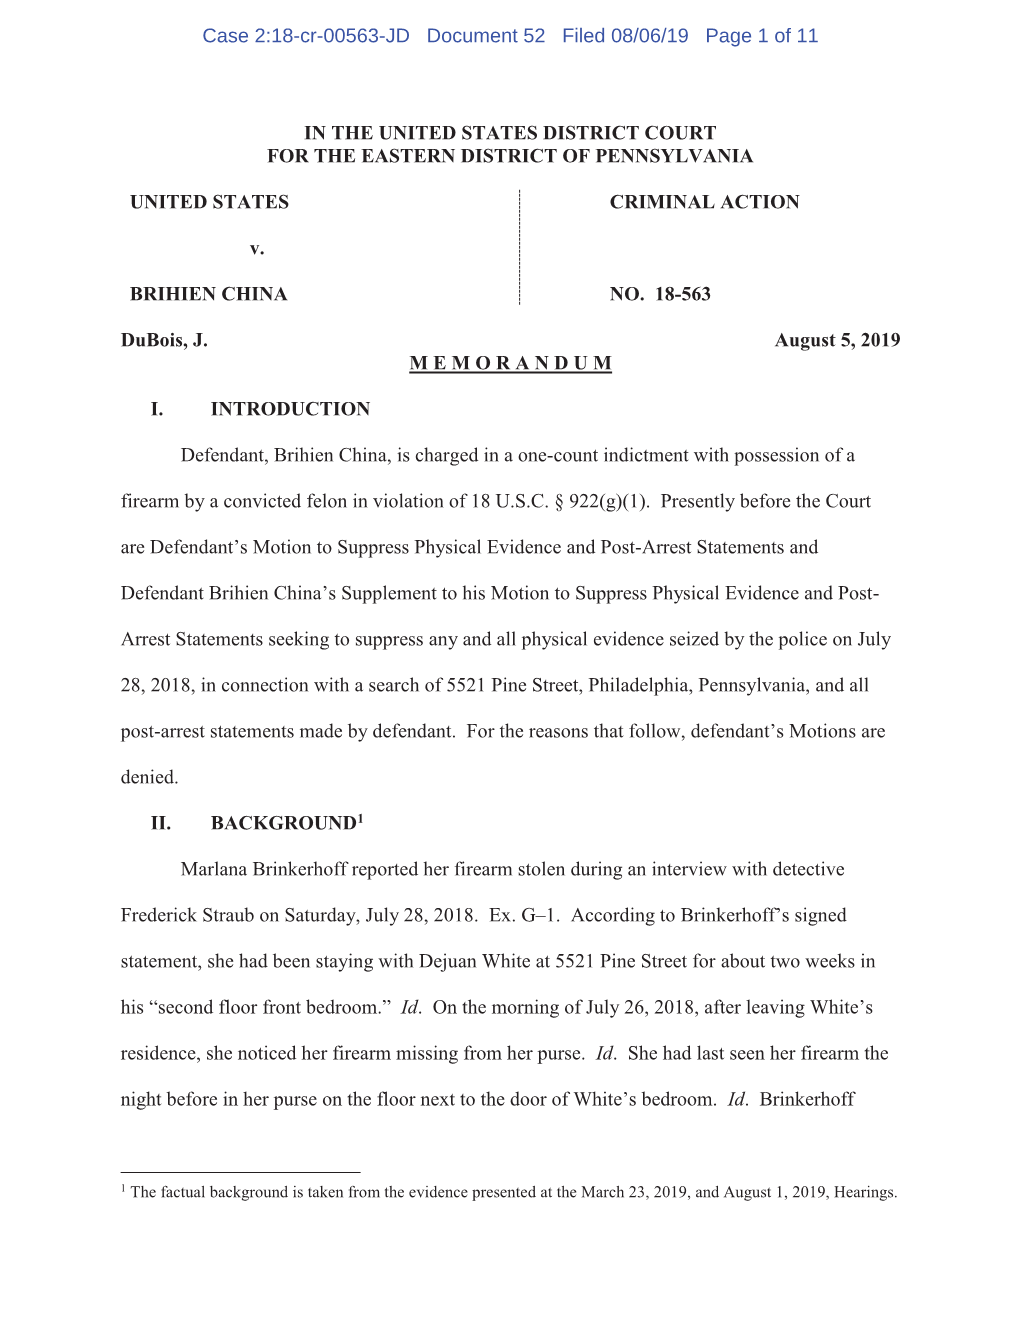 Case 2:18-Cr-00563-JD Document 52 Filed 08/06/19 Page 1 of 11